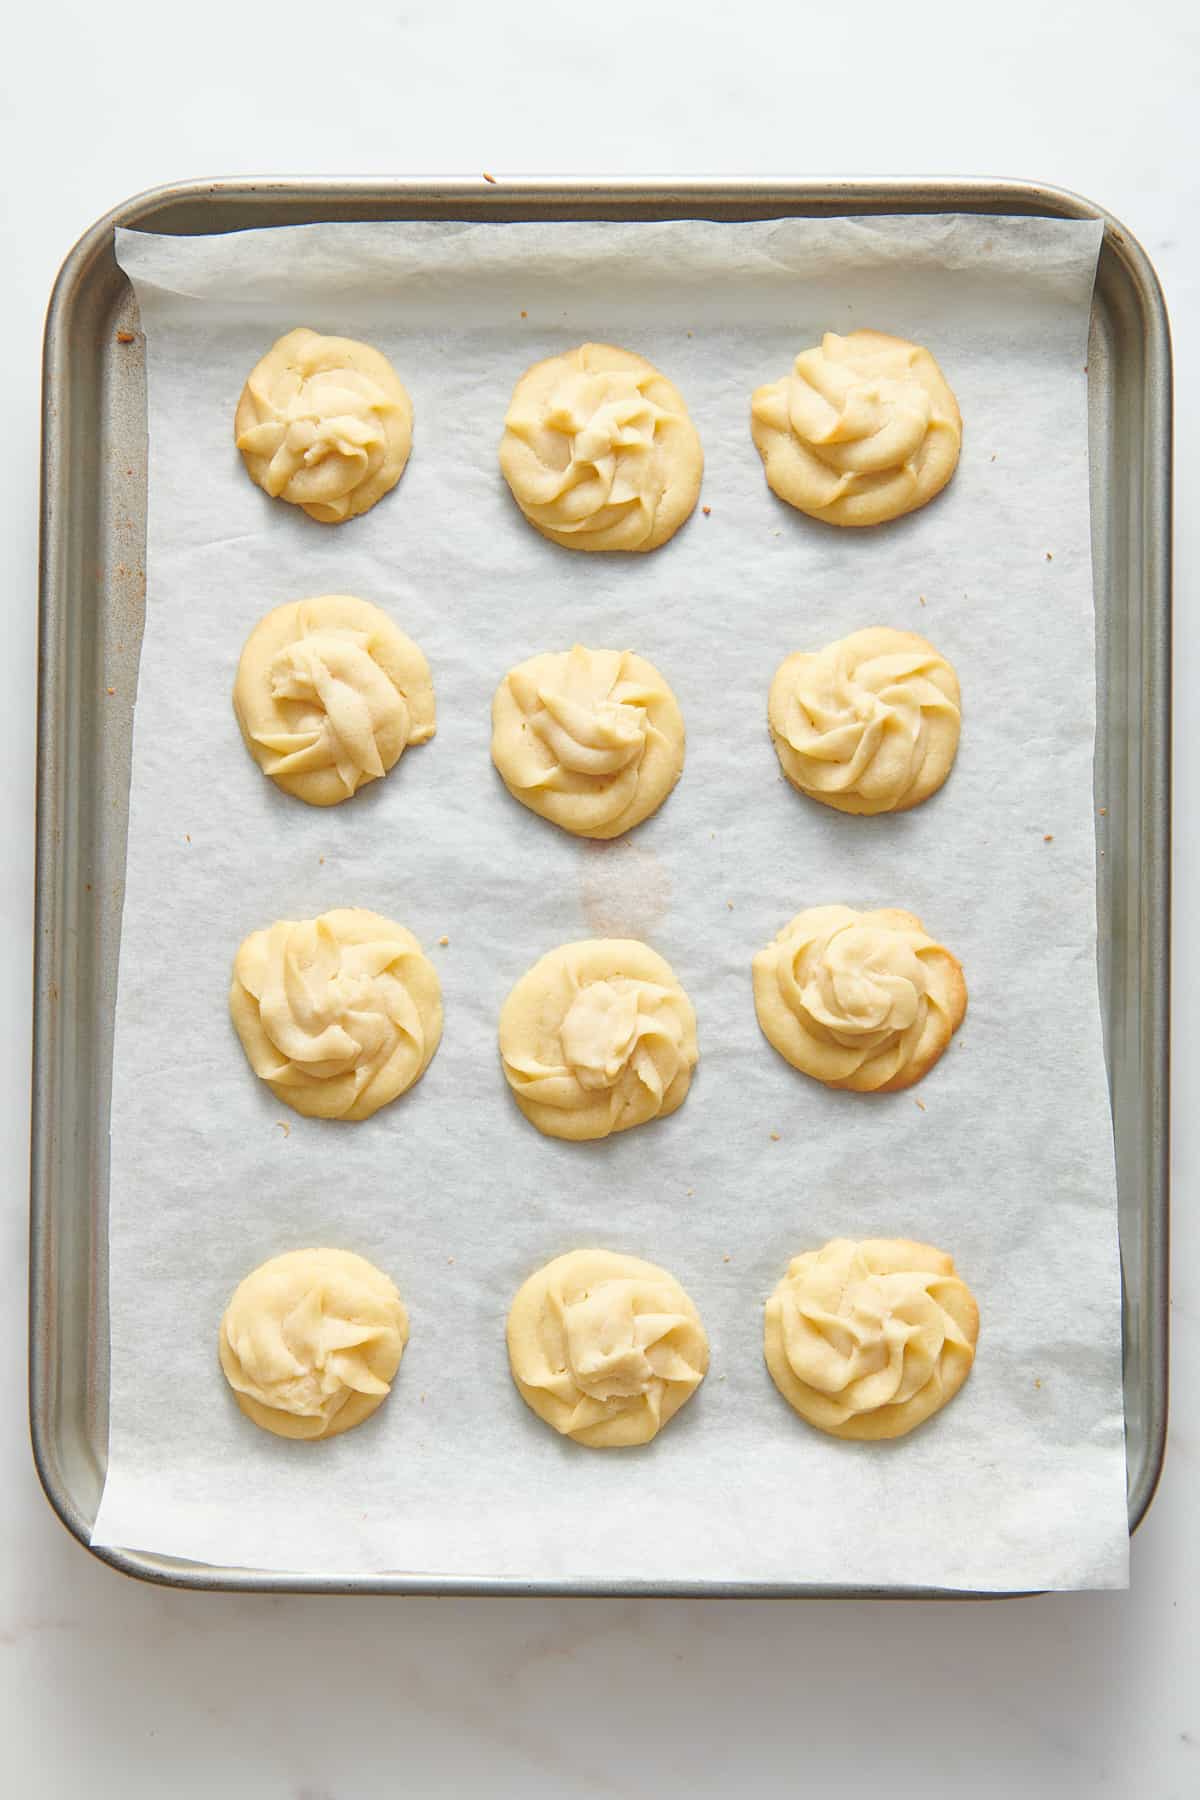 12 christmas butter cookies baked and sitting on a parchment-lined baking tray. 